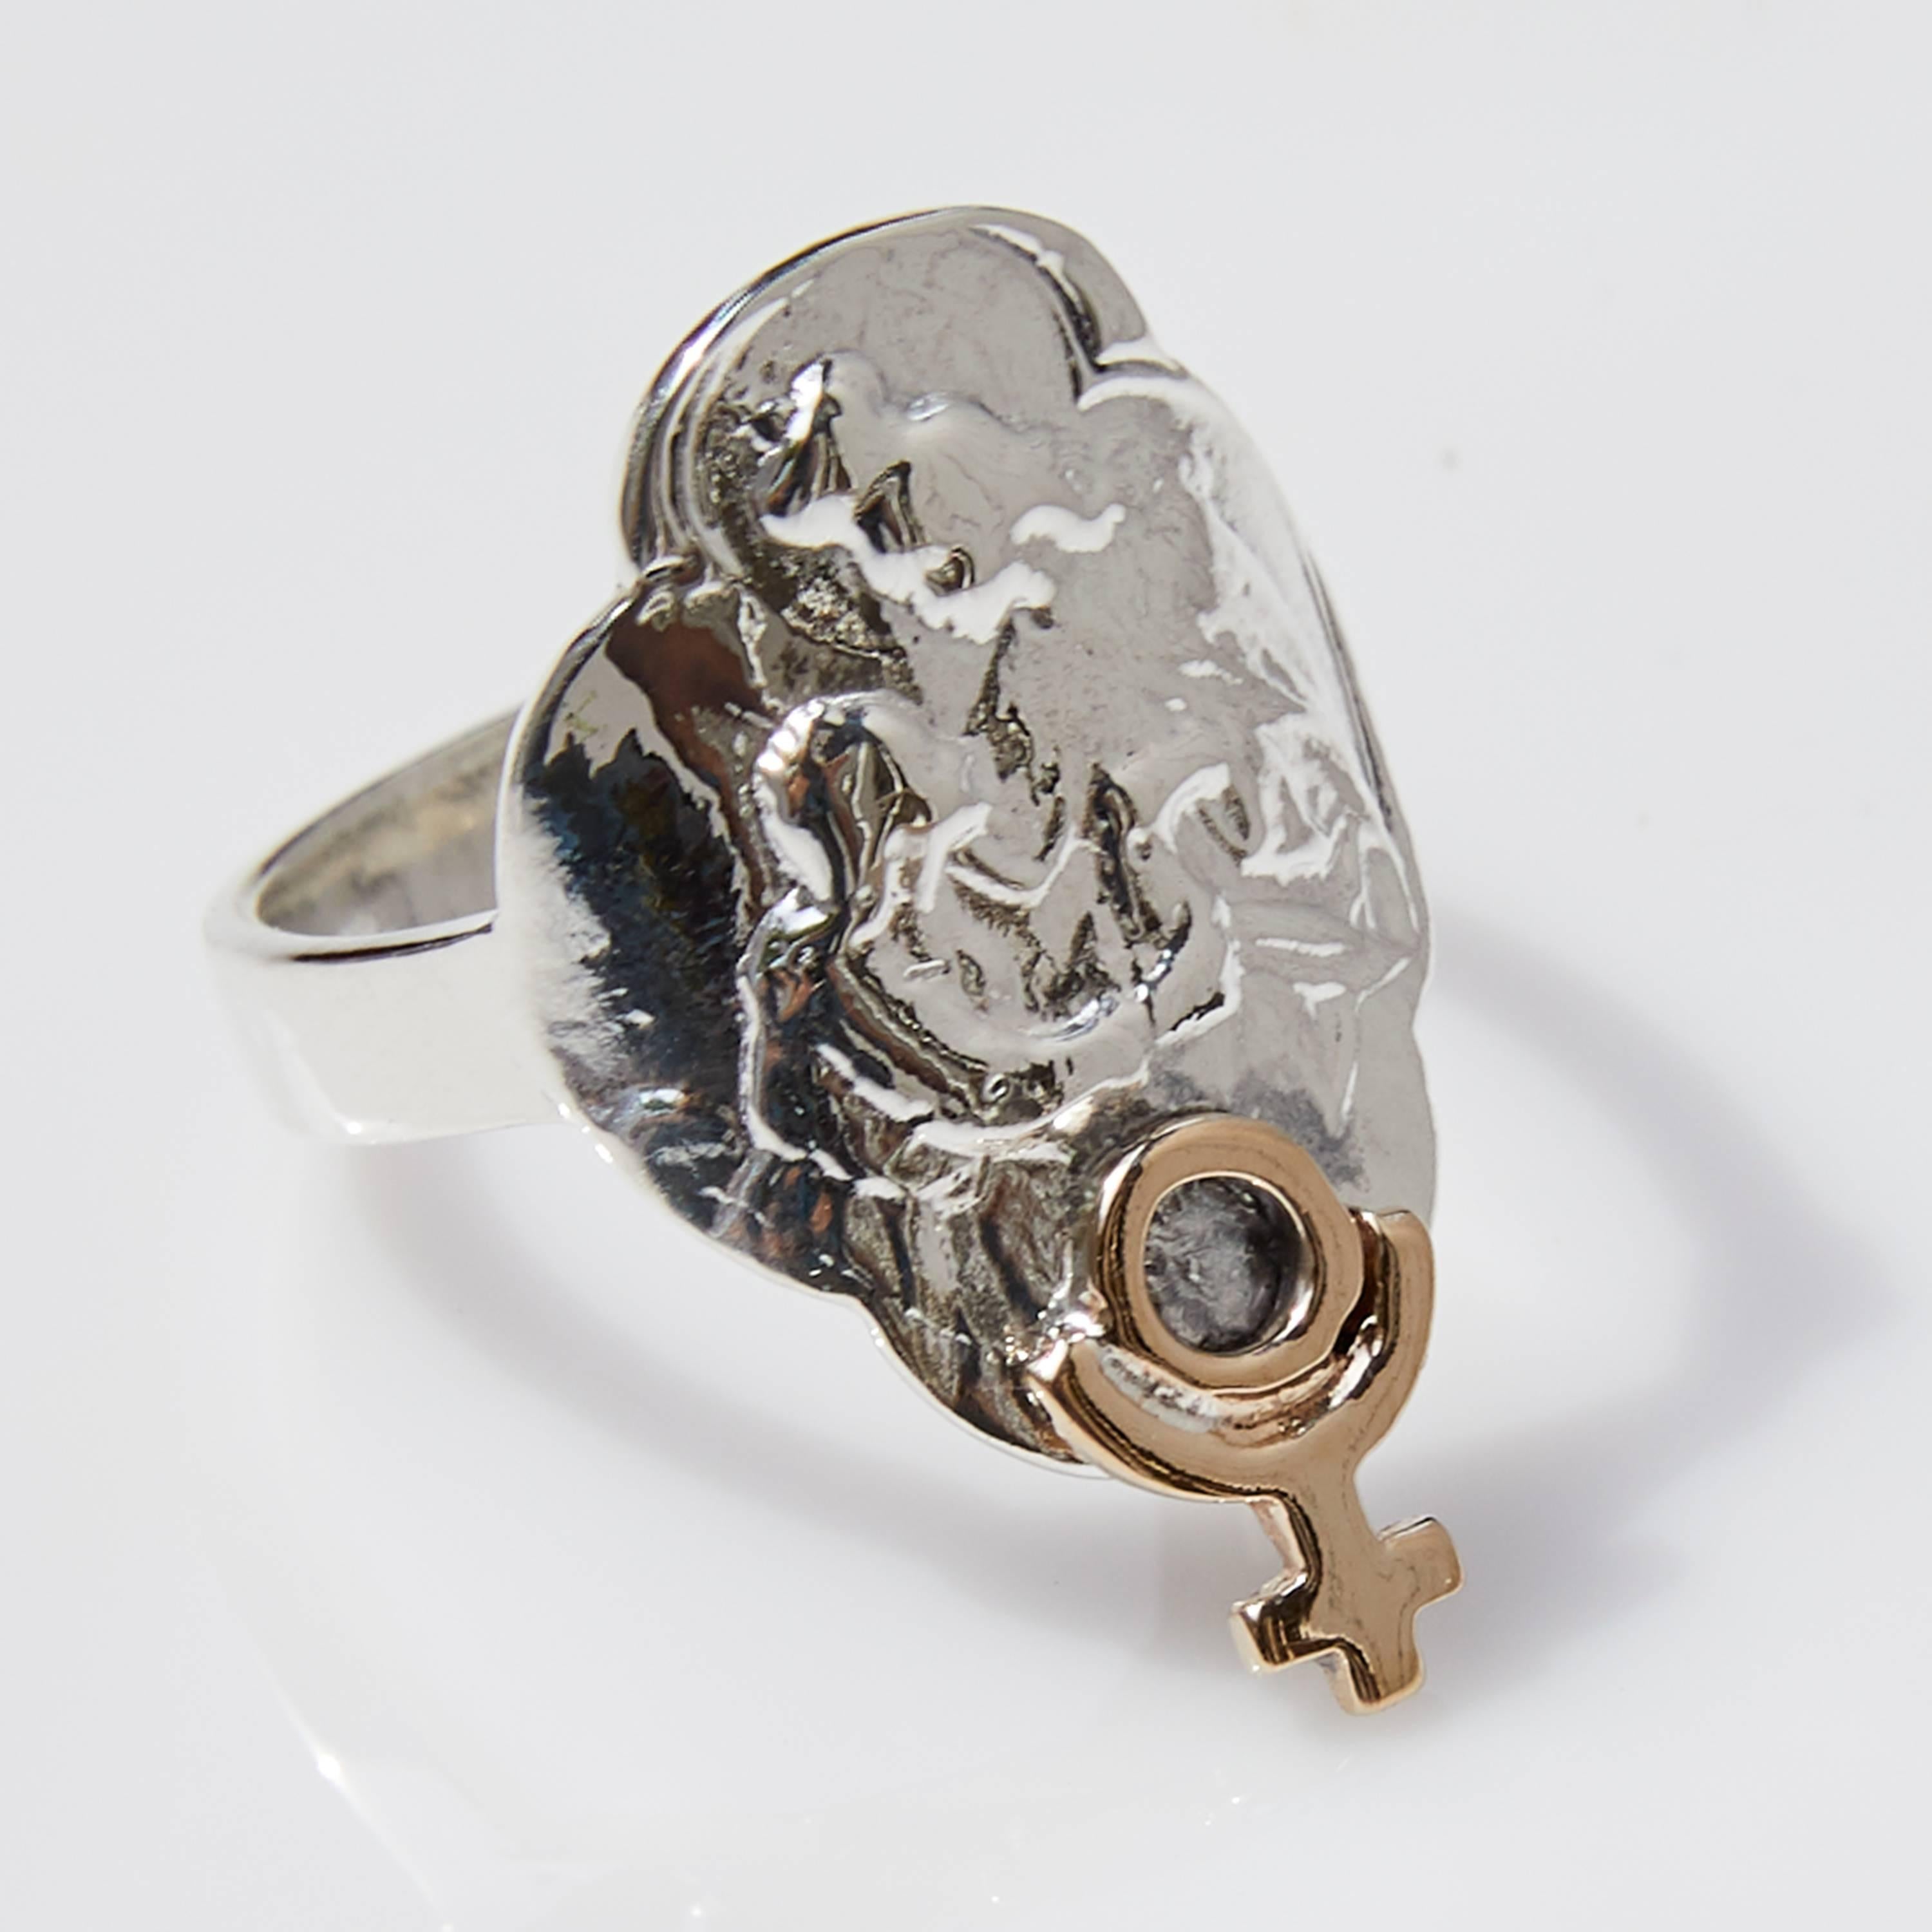 Virgin Mary Medal Ring Sterling Silver Crest Pluto Mercury Venus or Mars Astrology J Dauphin

You need to pick what planet you want to have on the Virgin Mary between Pluto Mercury Venus or Mars

J DAUPHIN 